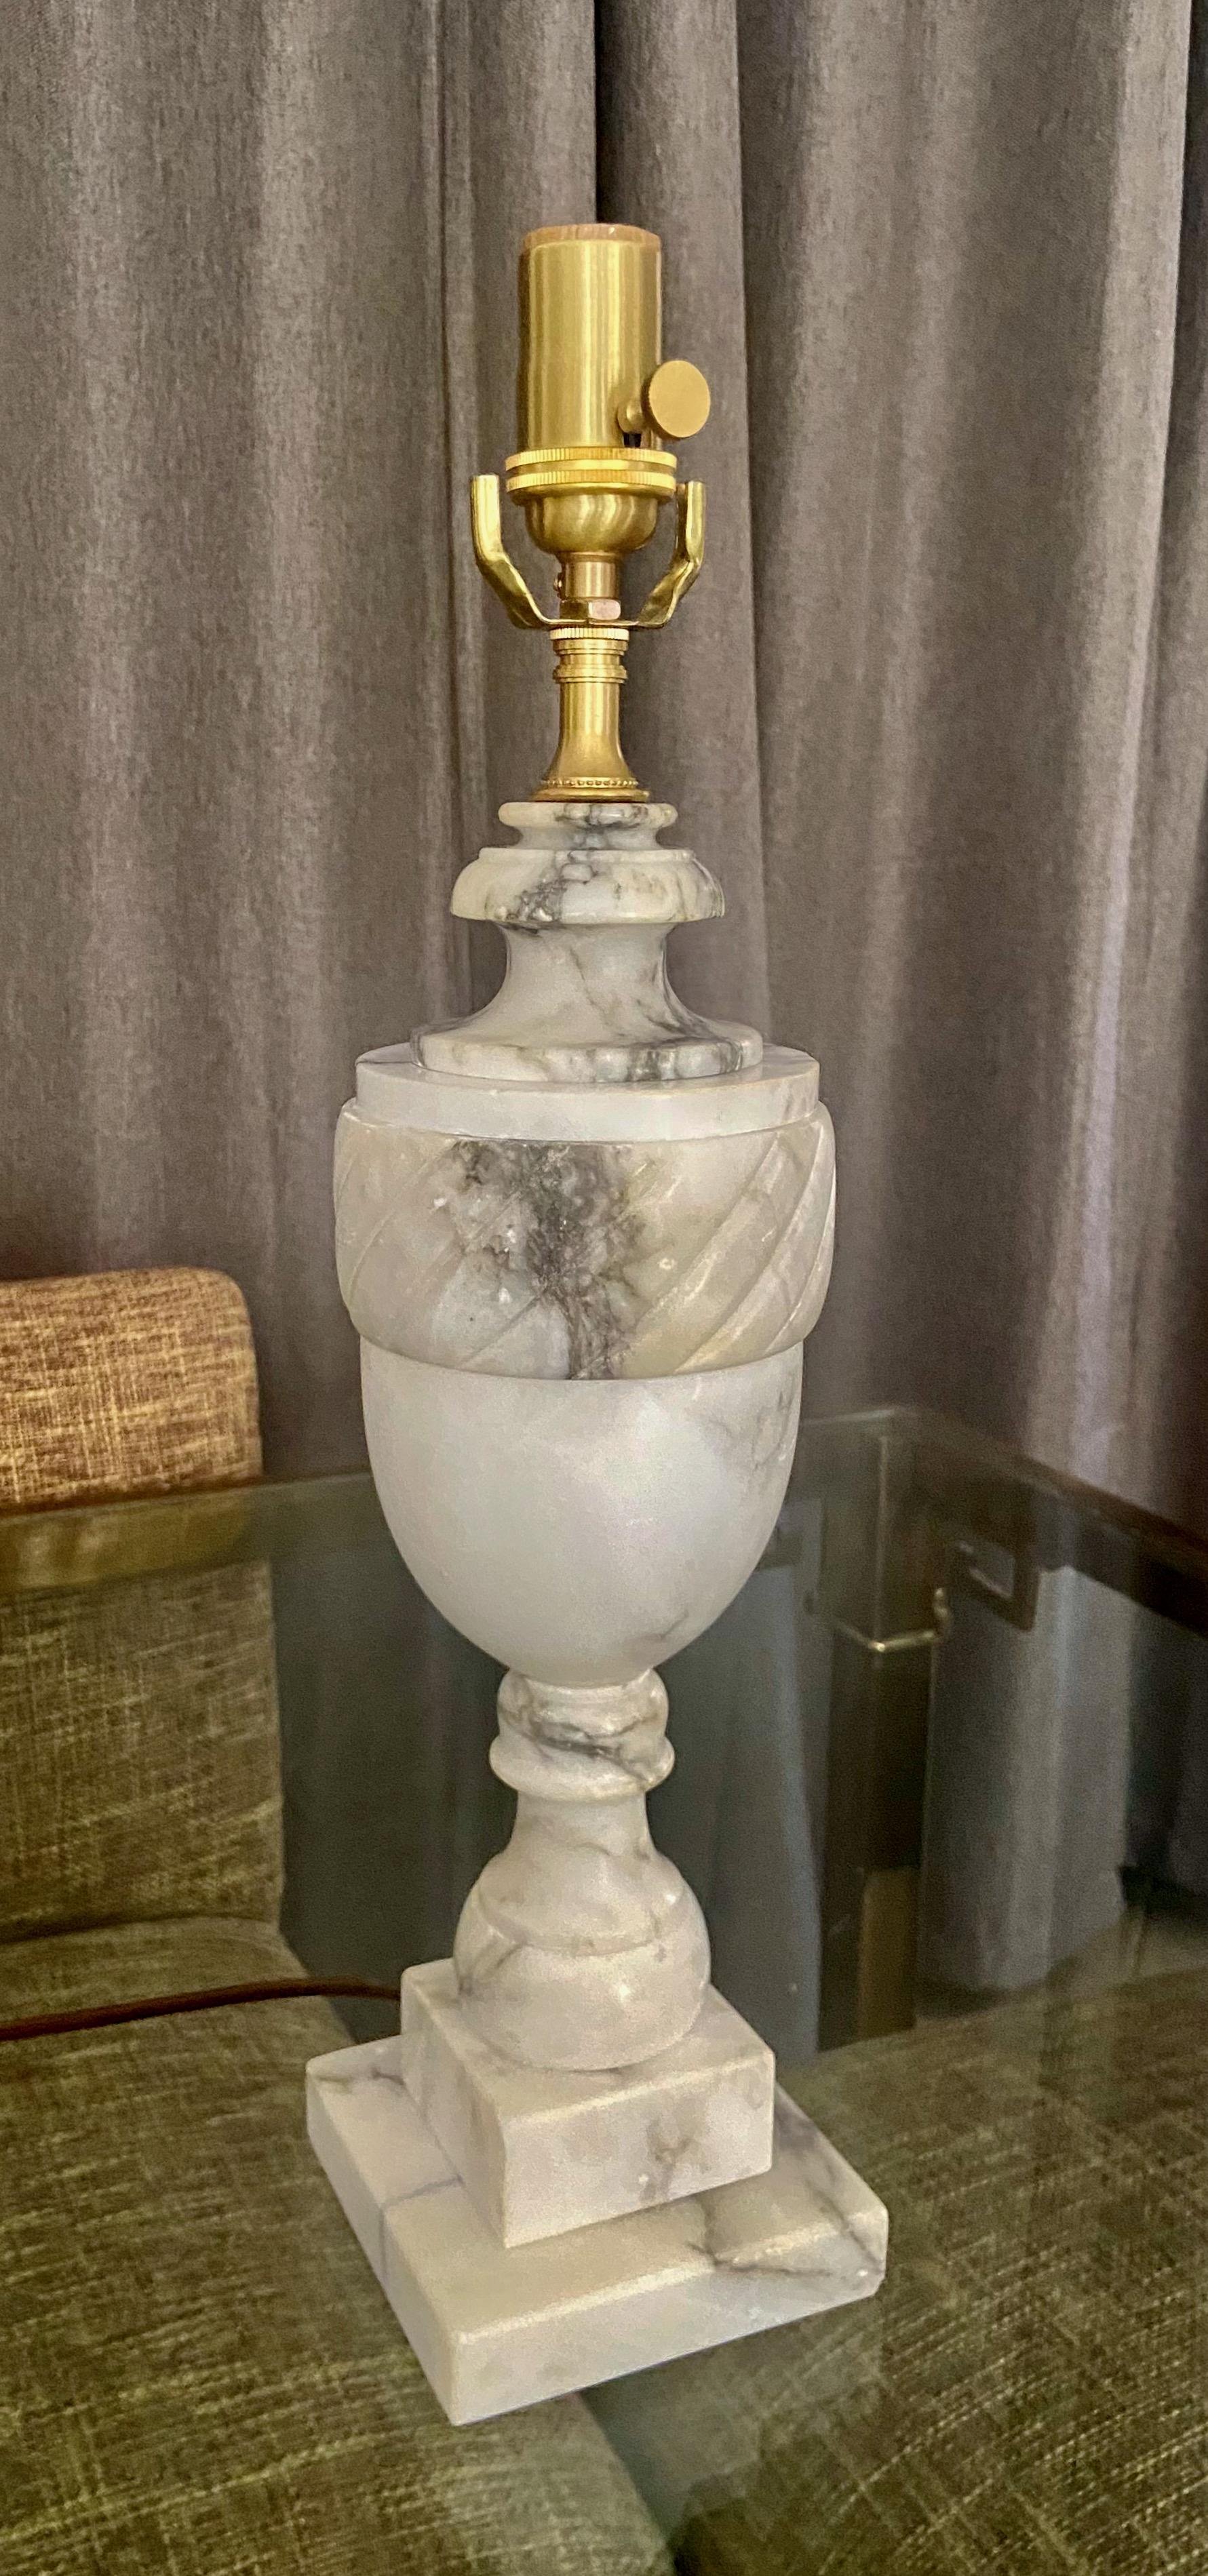 Single finely crafted hand carved neo-classic style urn form alabaster lamp. Newly wired with 3 way socket and rayon covered cord.
Height to top of alabaster is 15.